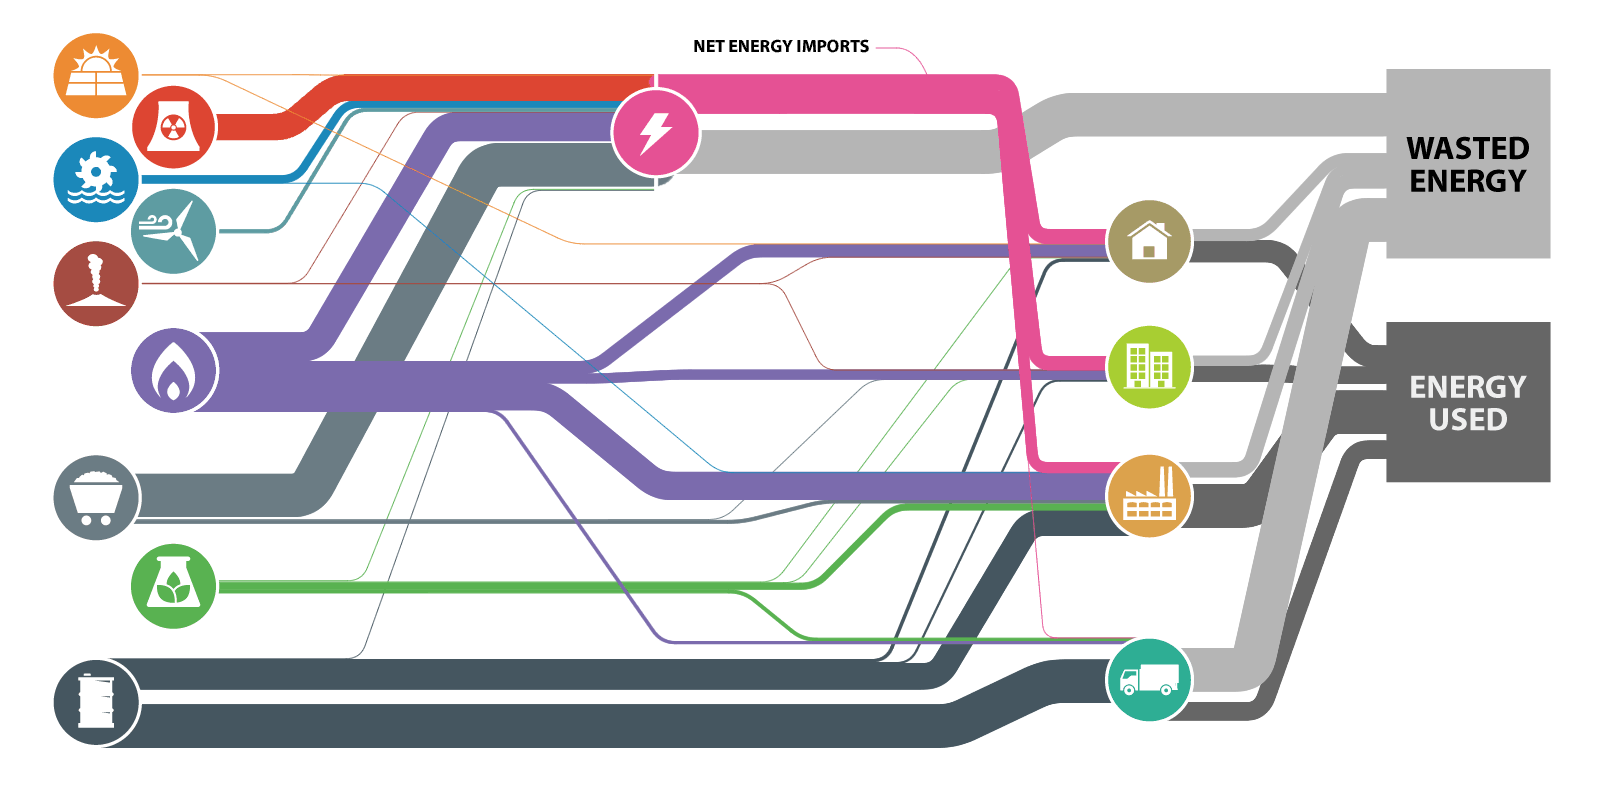 Base energy use chart with all layers active.